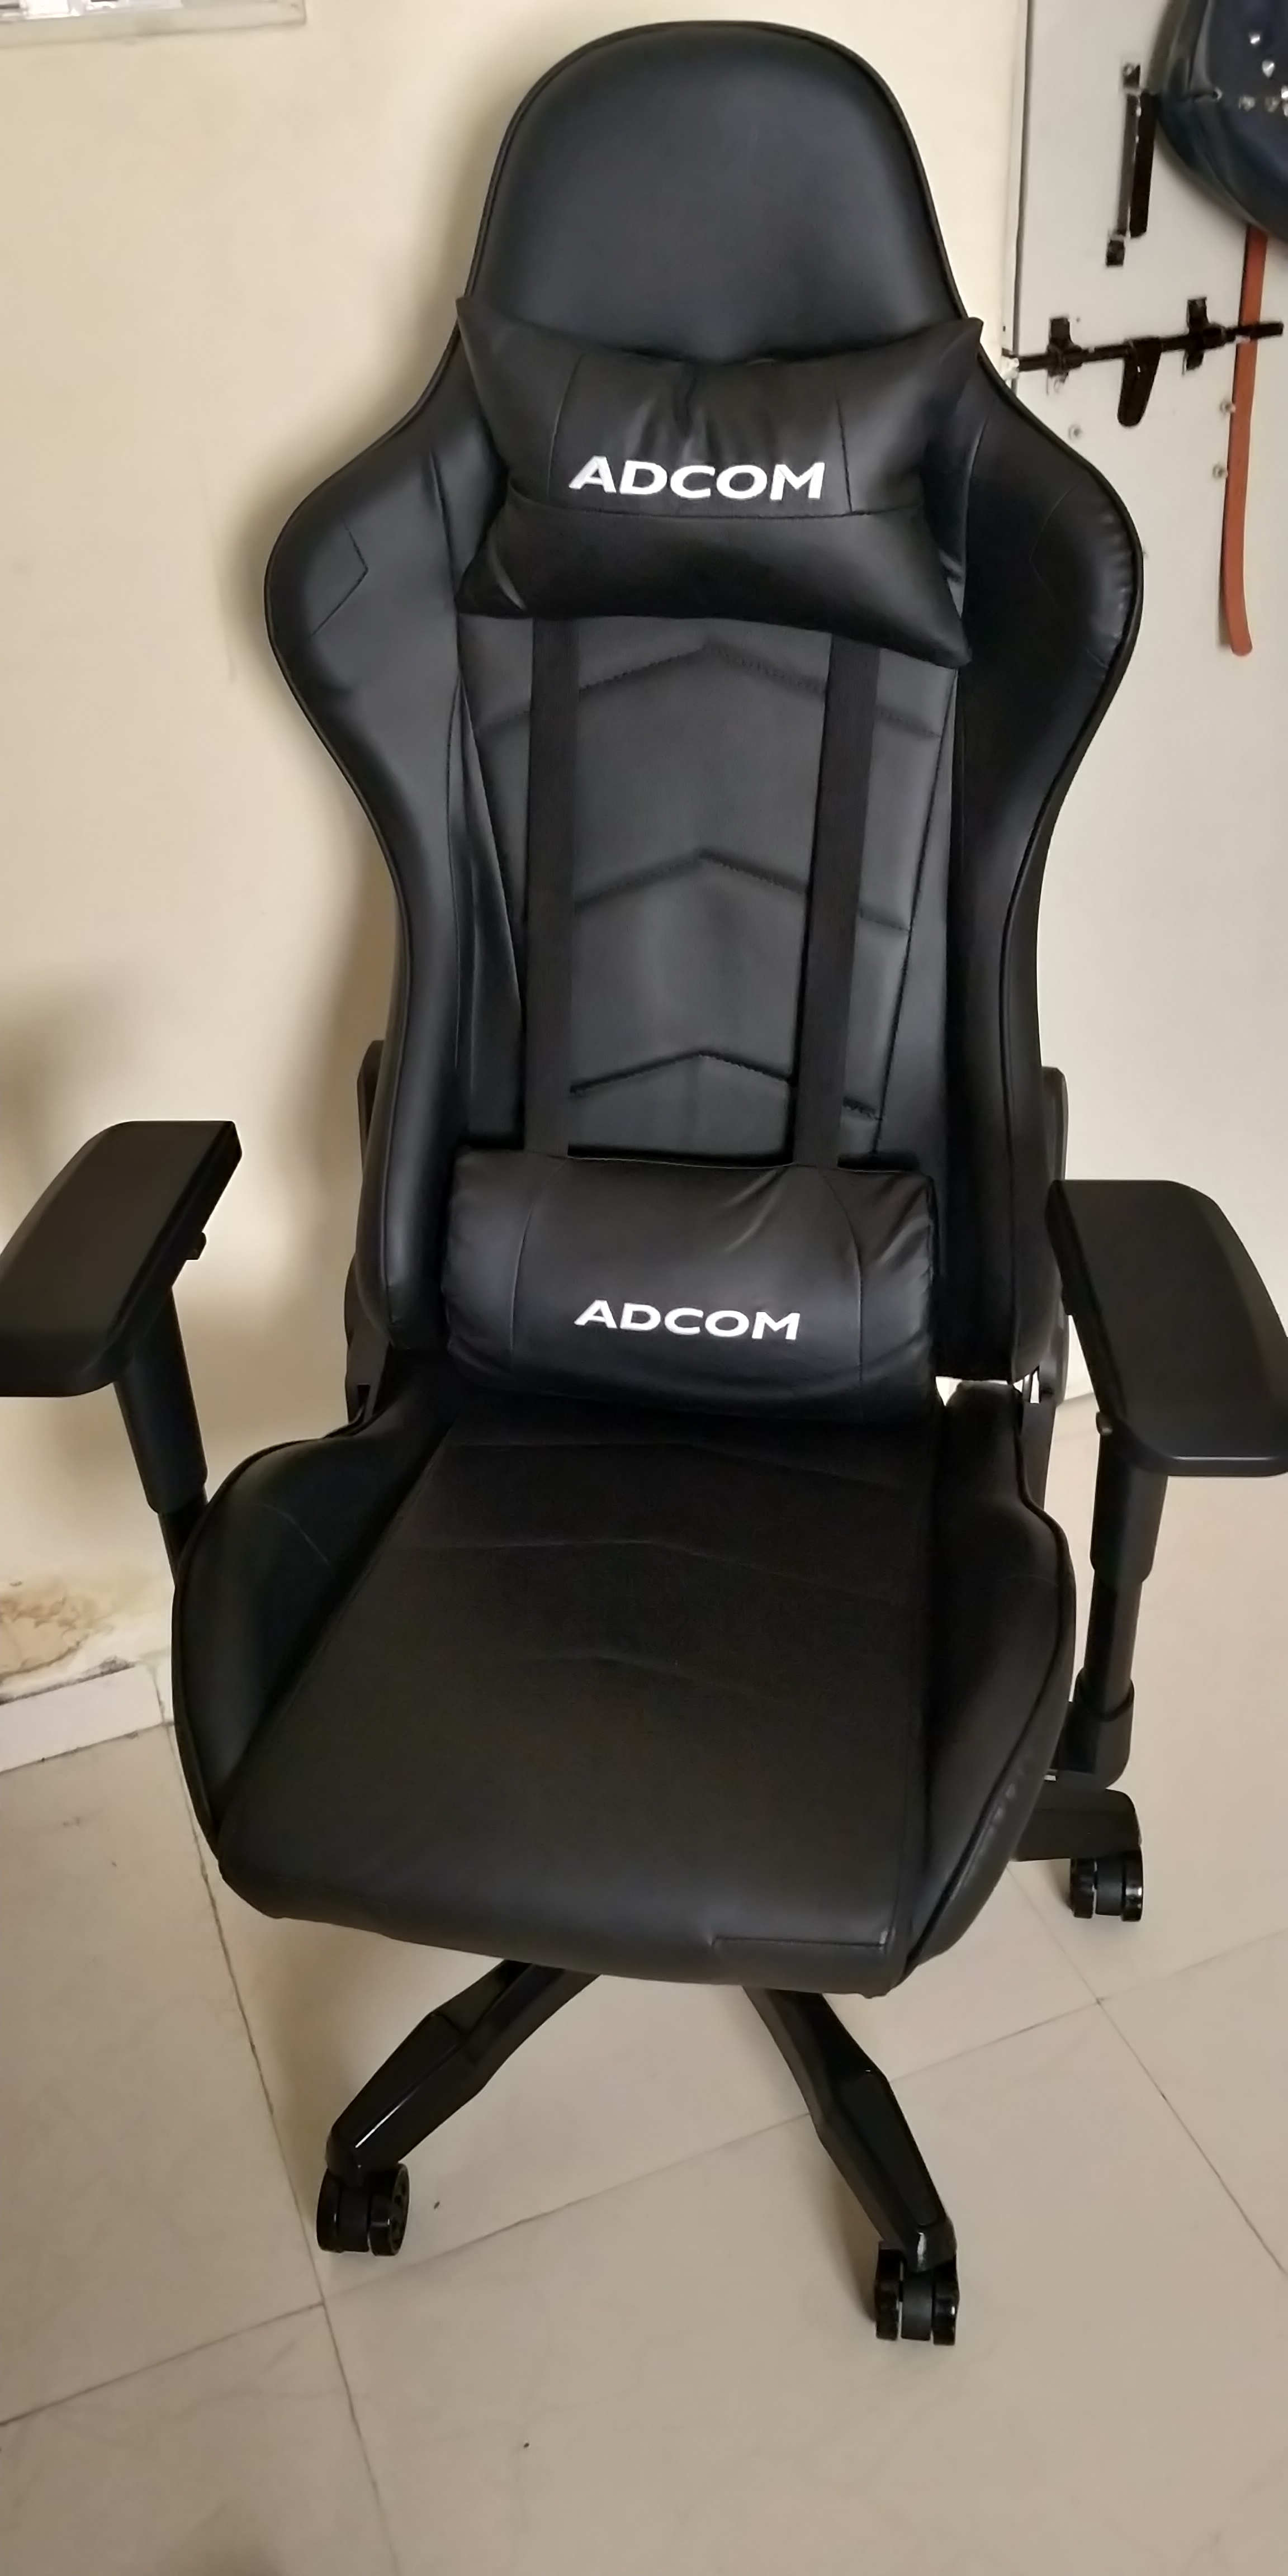 Buy Gaming Chair In India at Affordable Price | Adcom India :)